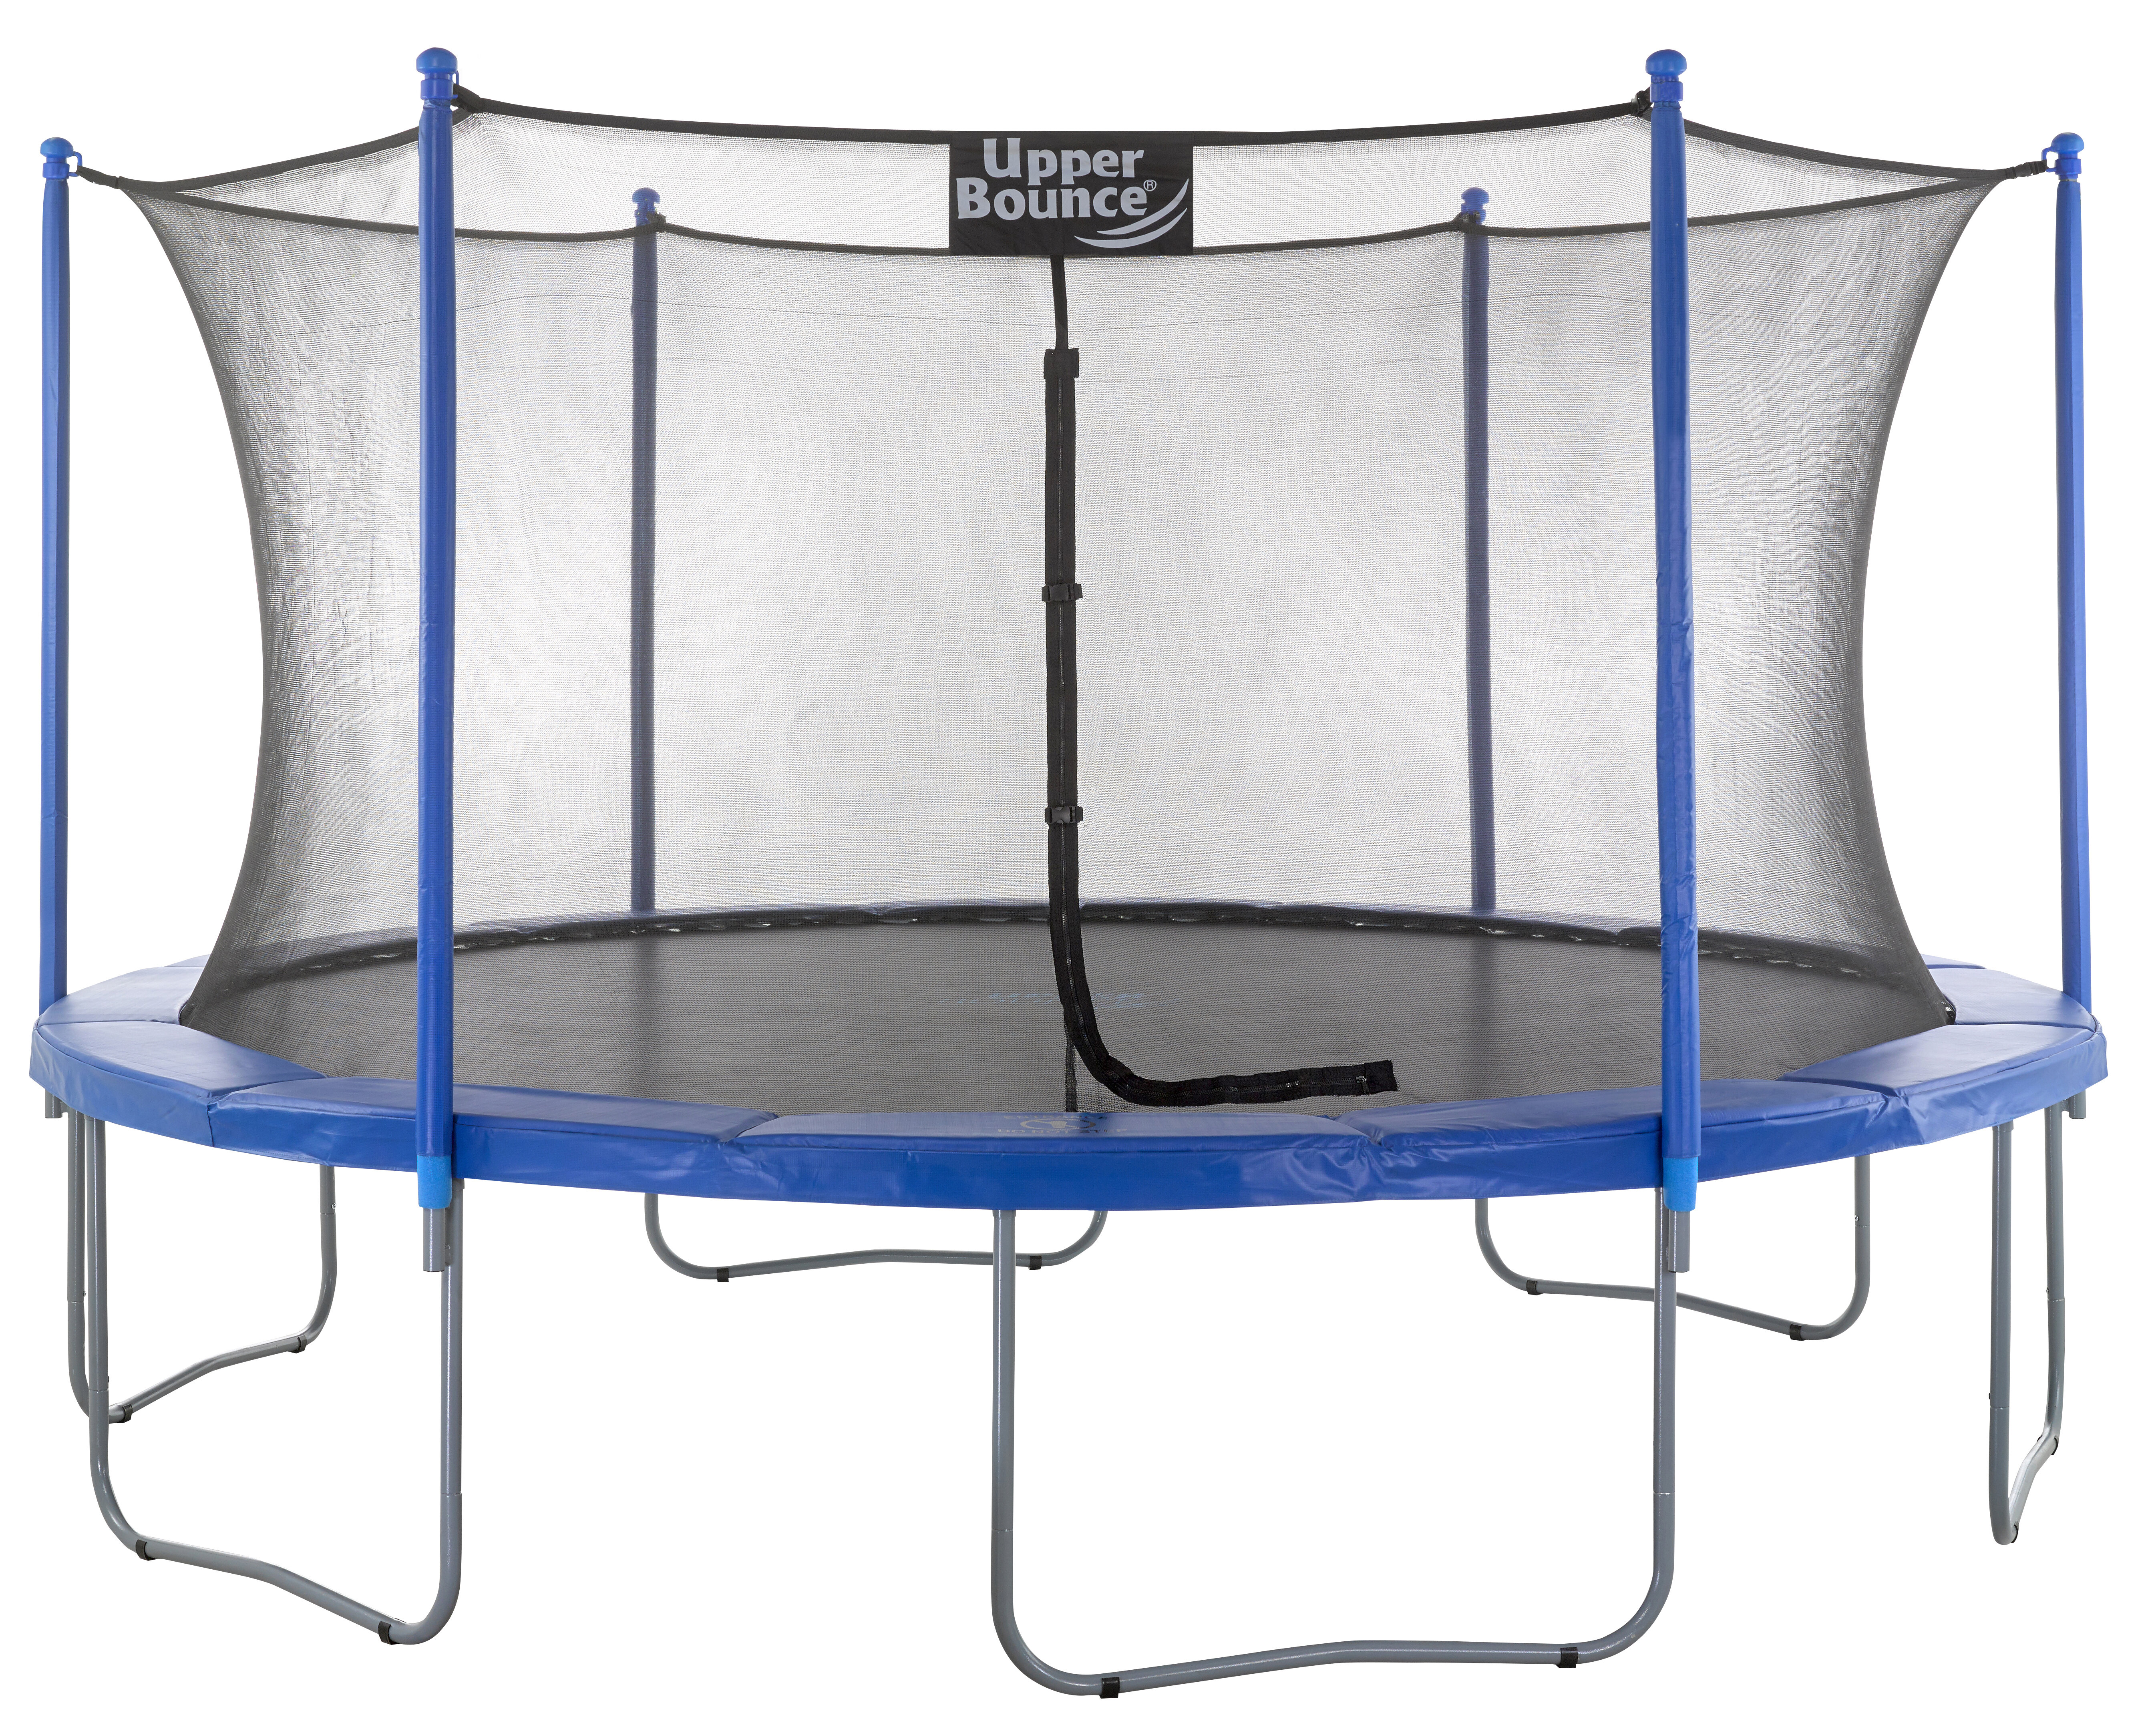 Upper Bounce 16 Trampoline With Enclosure Reviews Wayfair